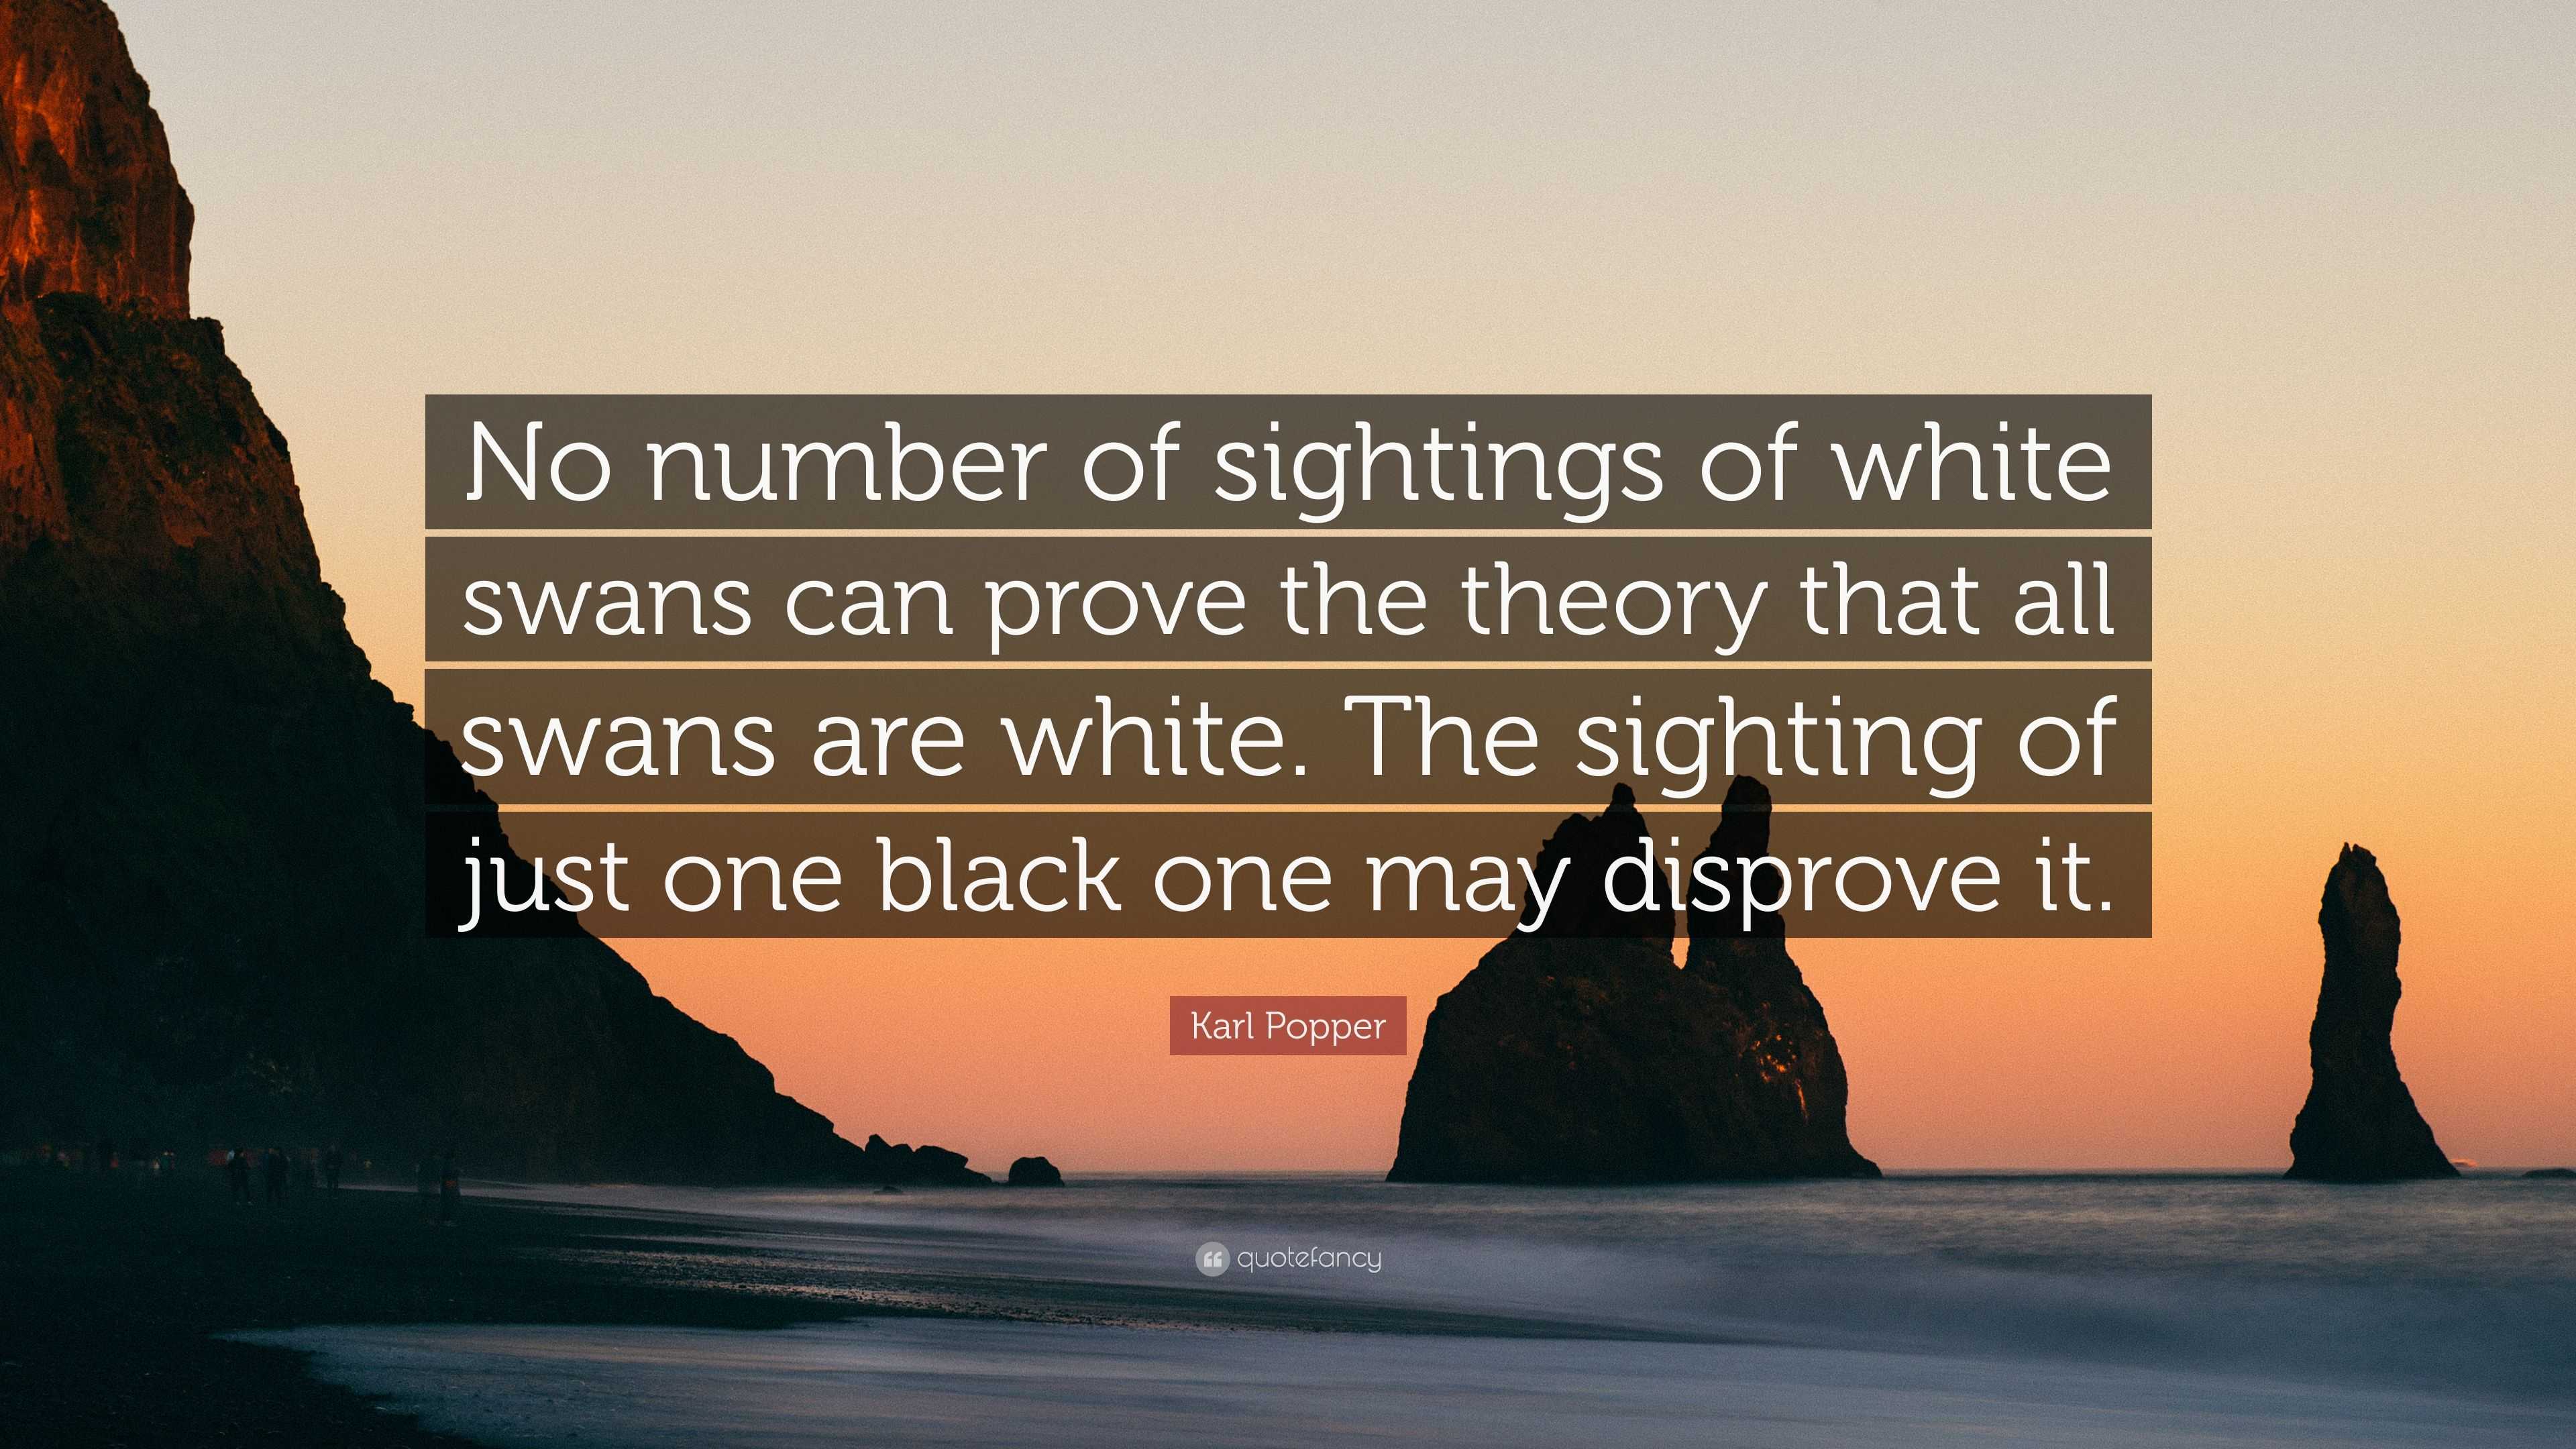 Hilse markedsføring ubrugt Karl Popper Quote: “No number of sightings of white swans can prove the  theory that all swans are white. The sighting of just one black one ...”